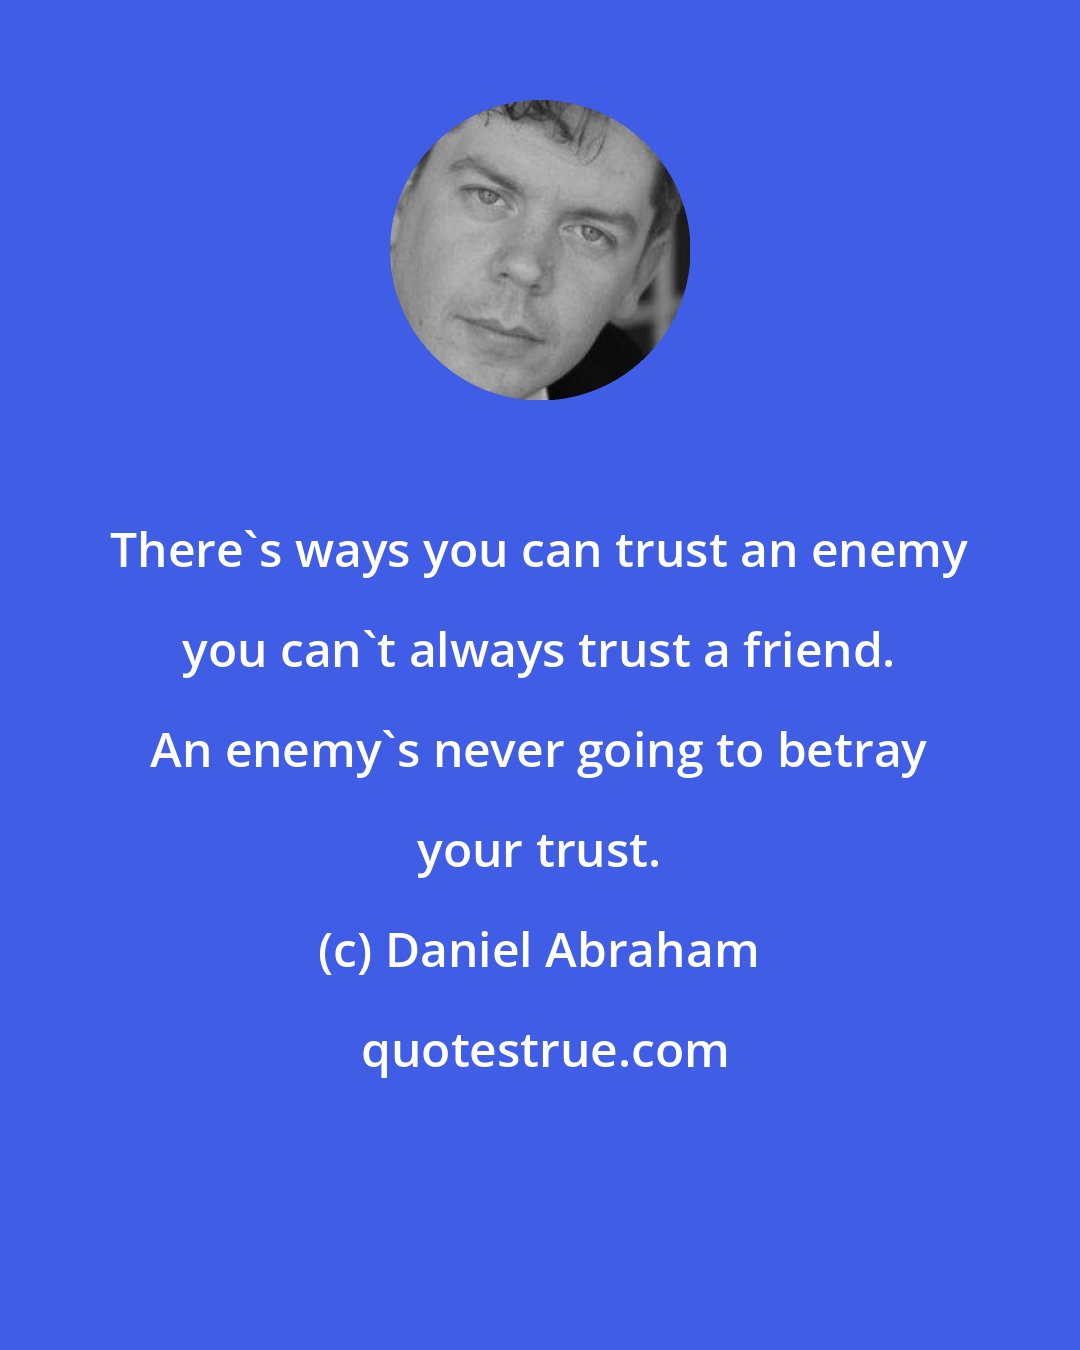 Daniel Abraham: There's ways you can trust an enemy you can't always trust a friend. An enemy's never going to betray your trust.